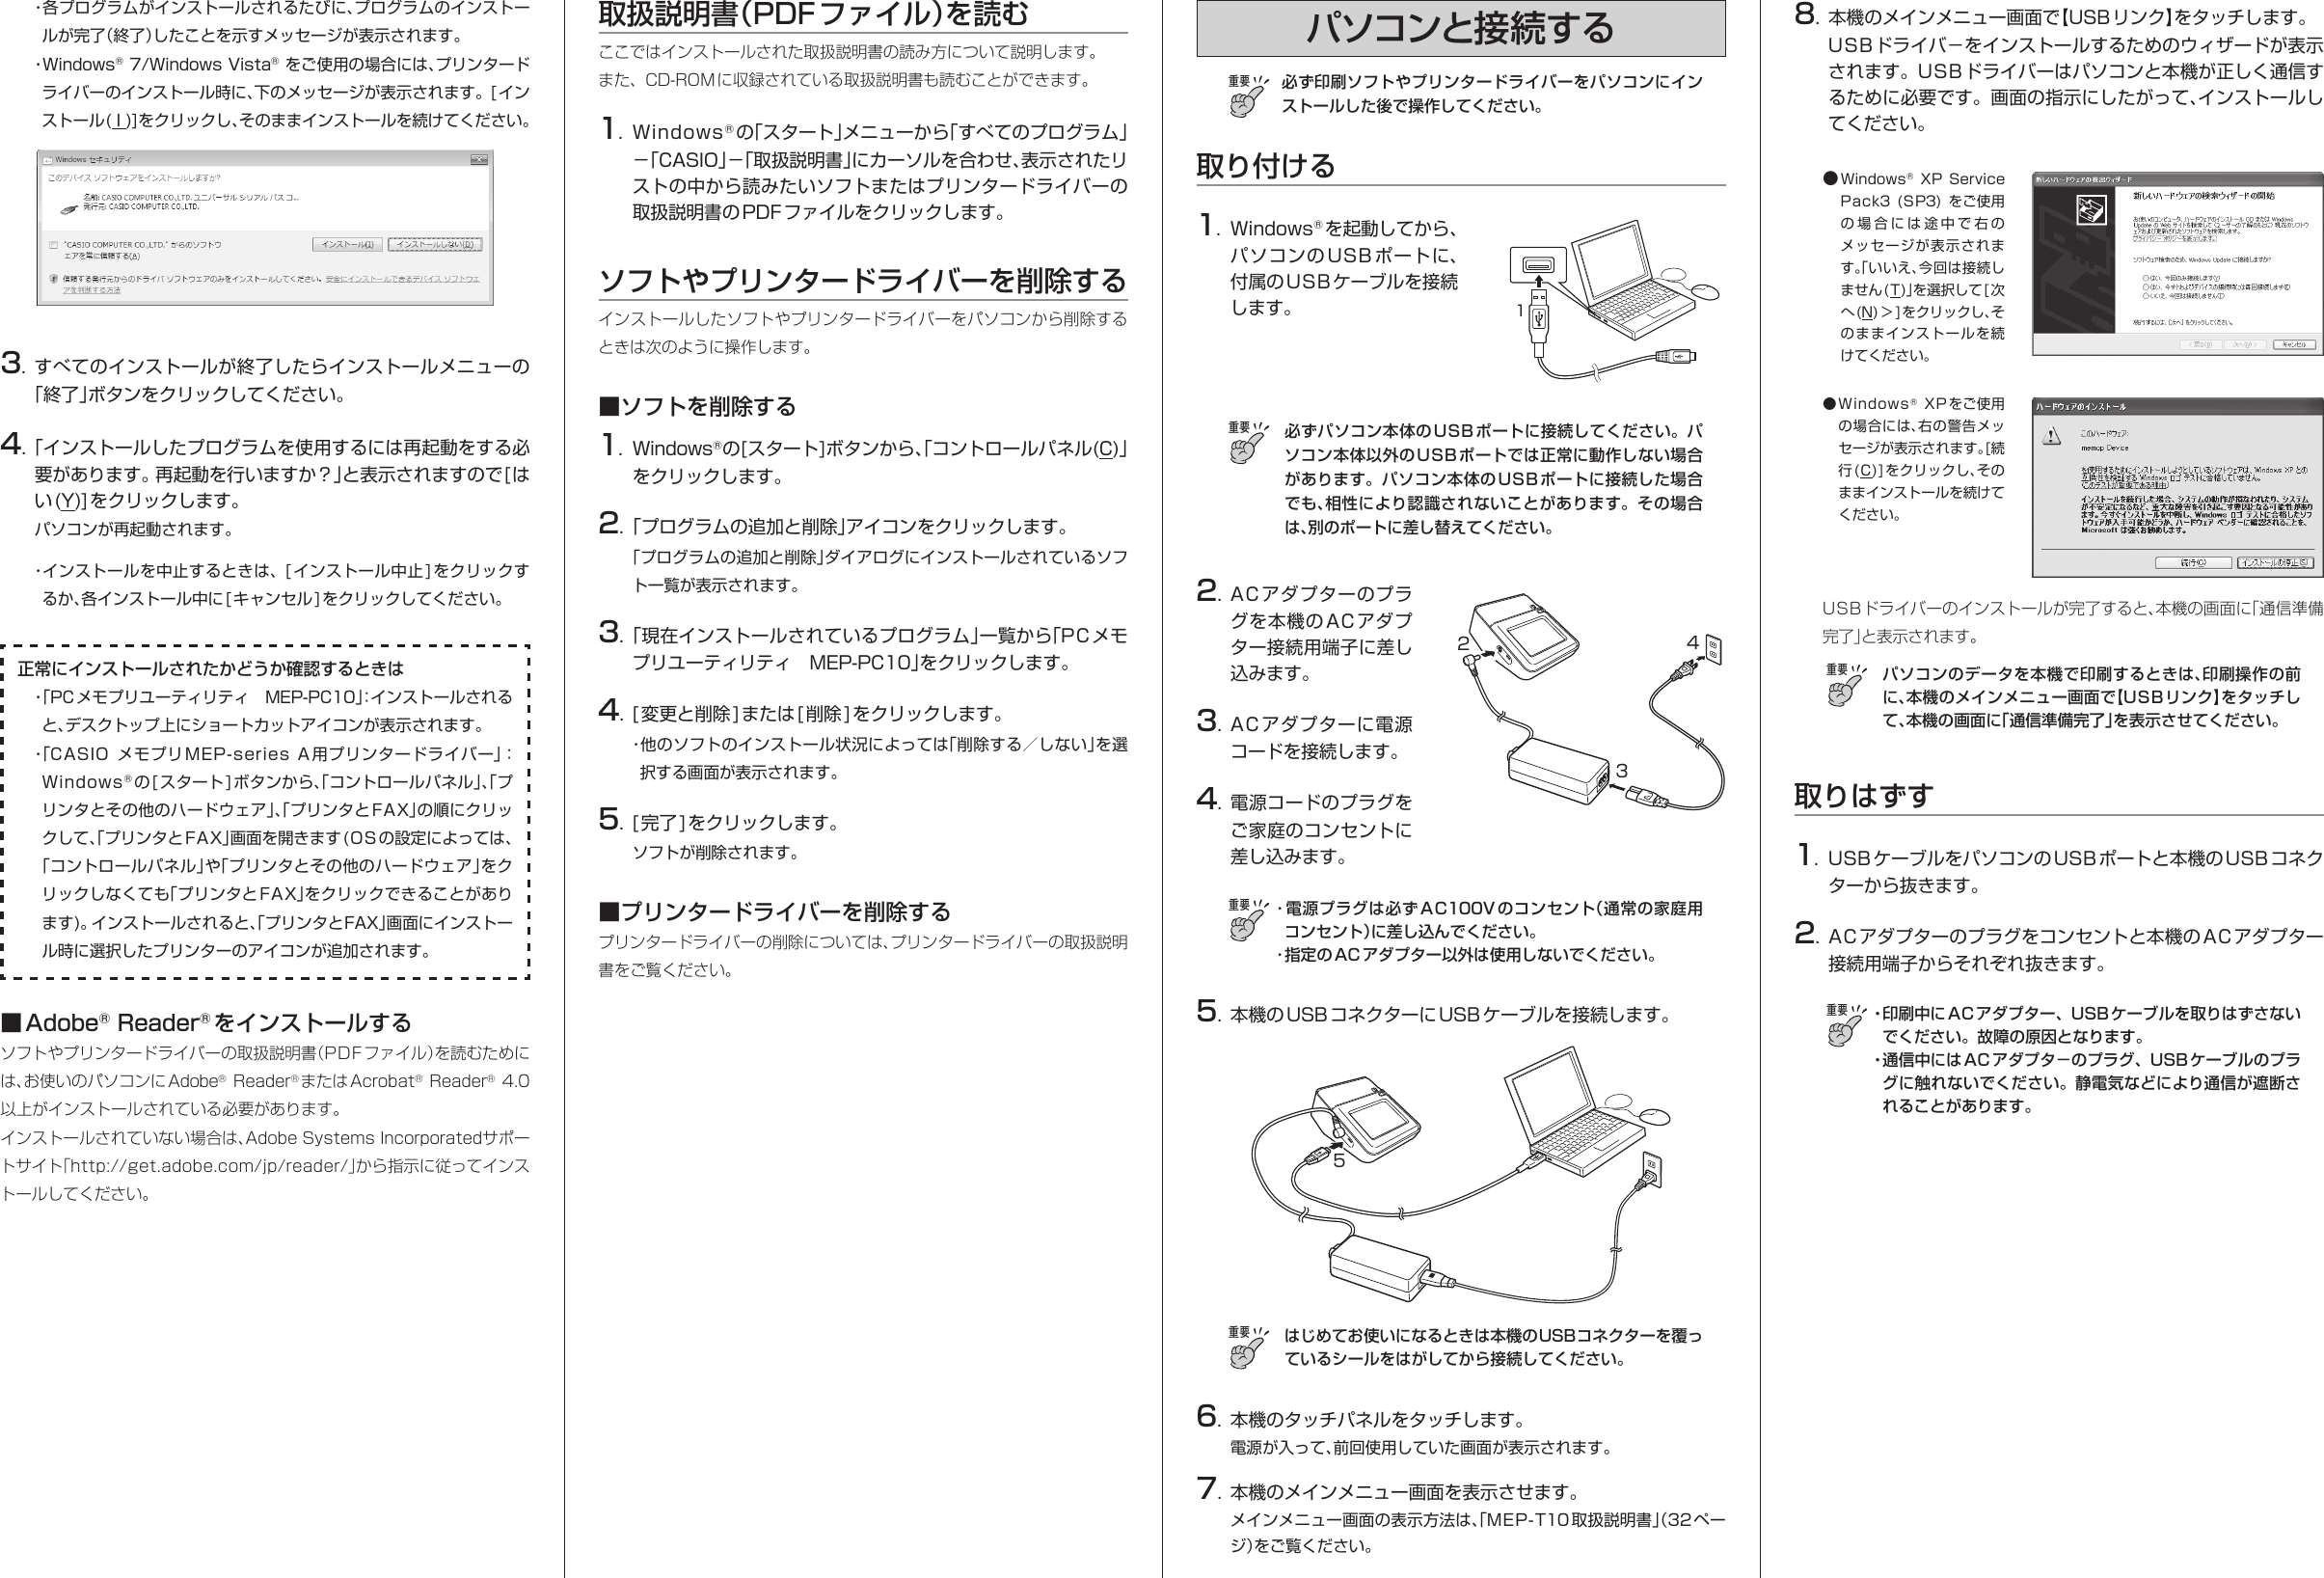 Page 3 of 4 - Casio MEP-T10_Install インストールガイド MEP-T10 Install Guide